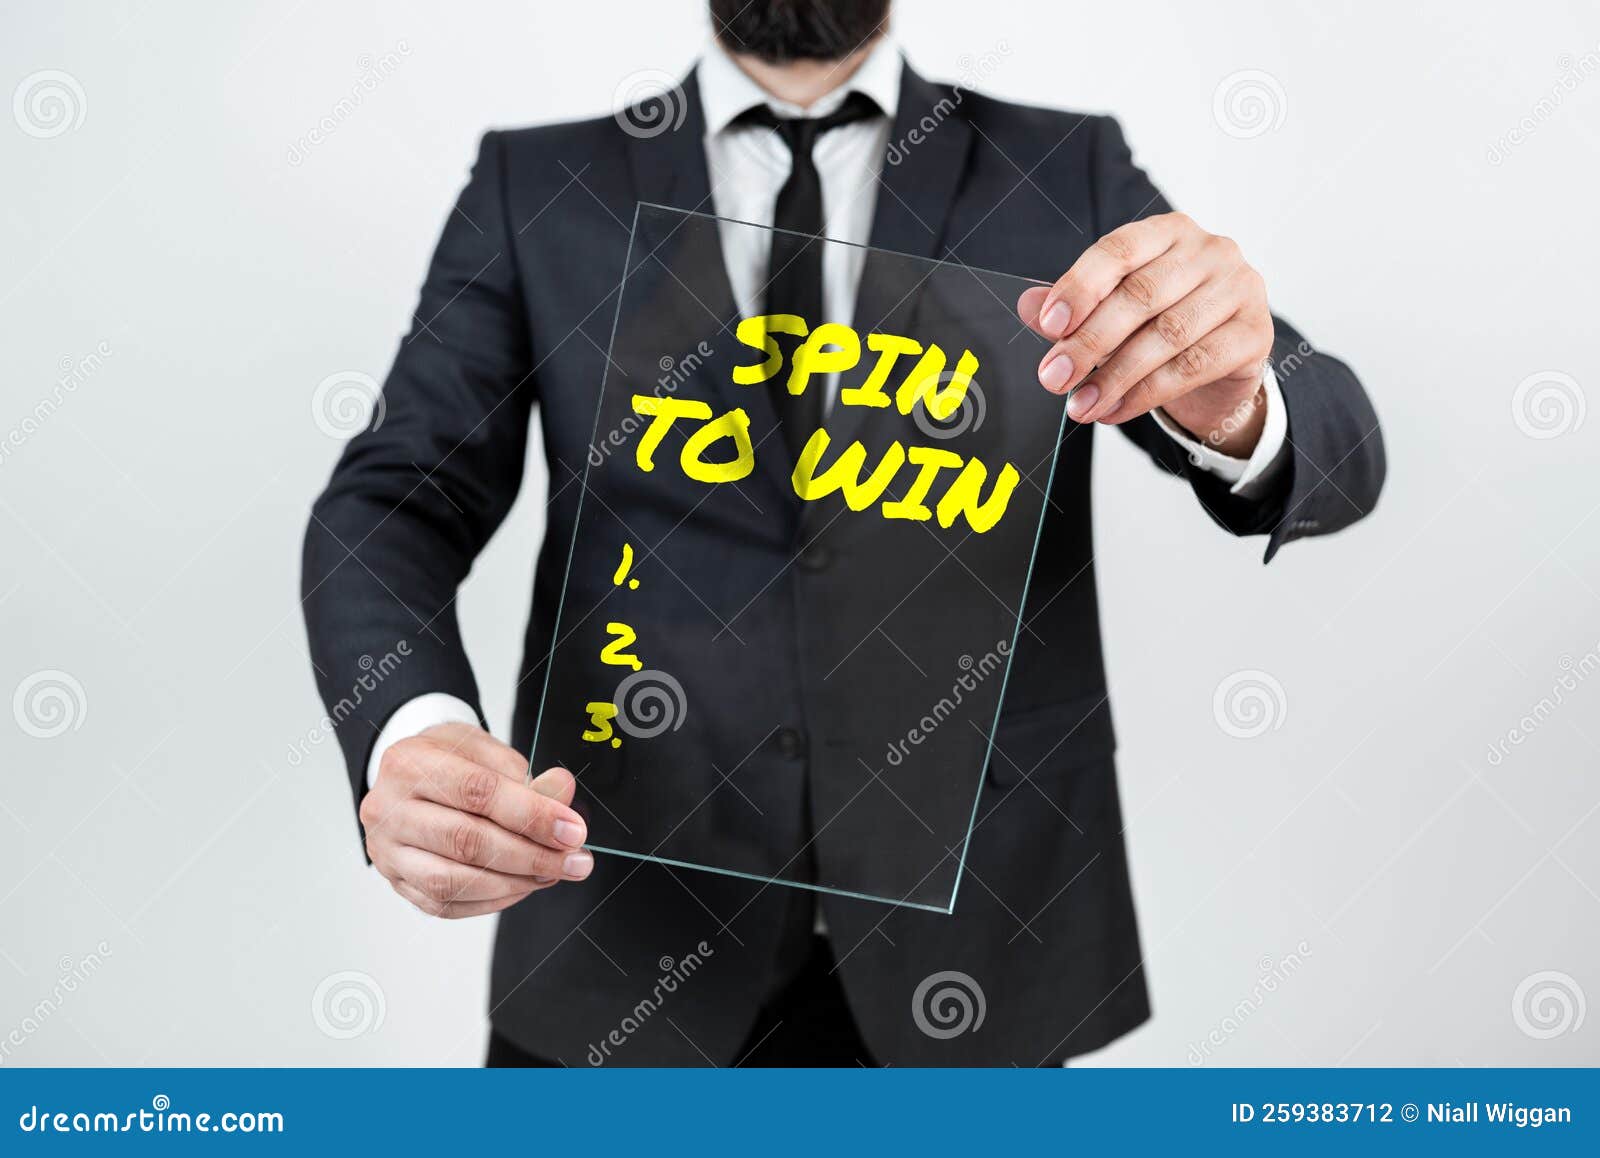 inspiration showing sign spin to win business idea try your luck fortune casino gambling lottery games risk handwriting text 259383712